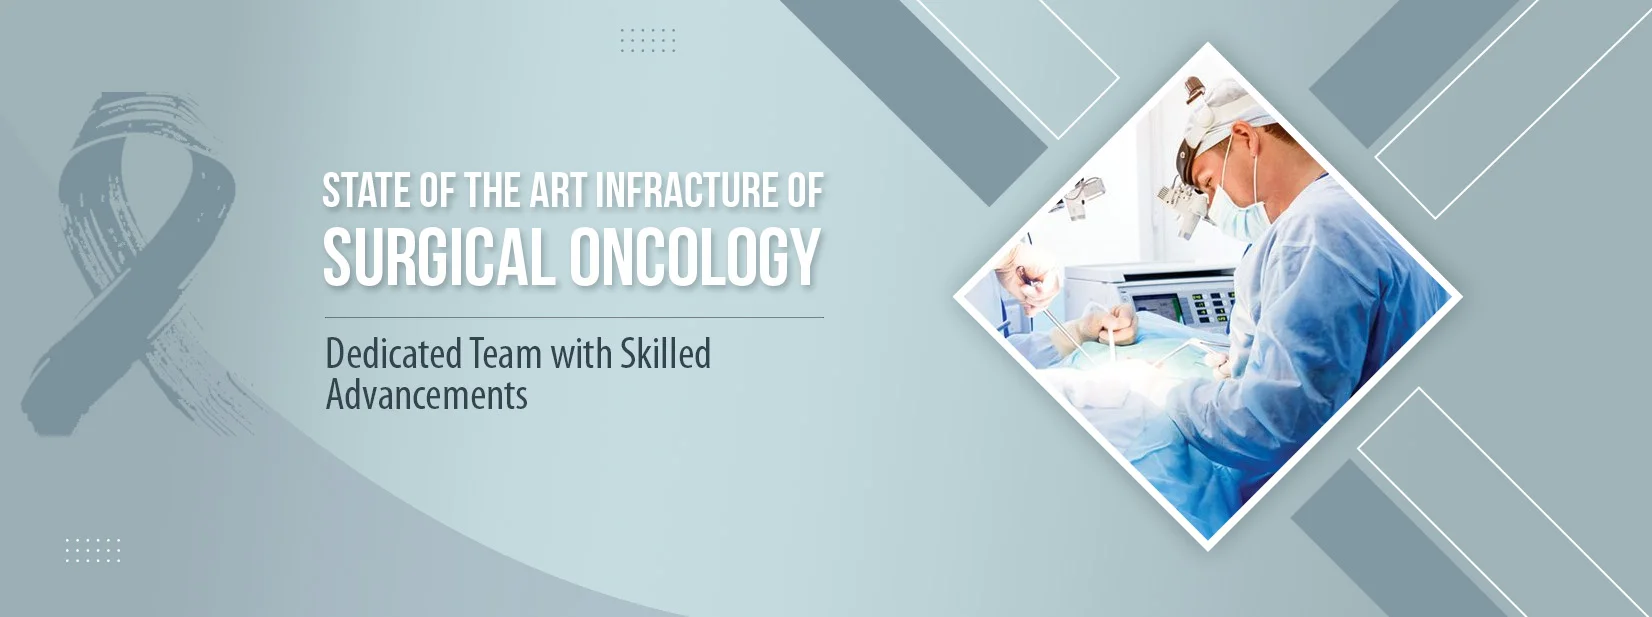 Surgical Oncology Banner